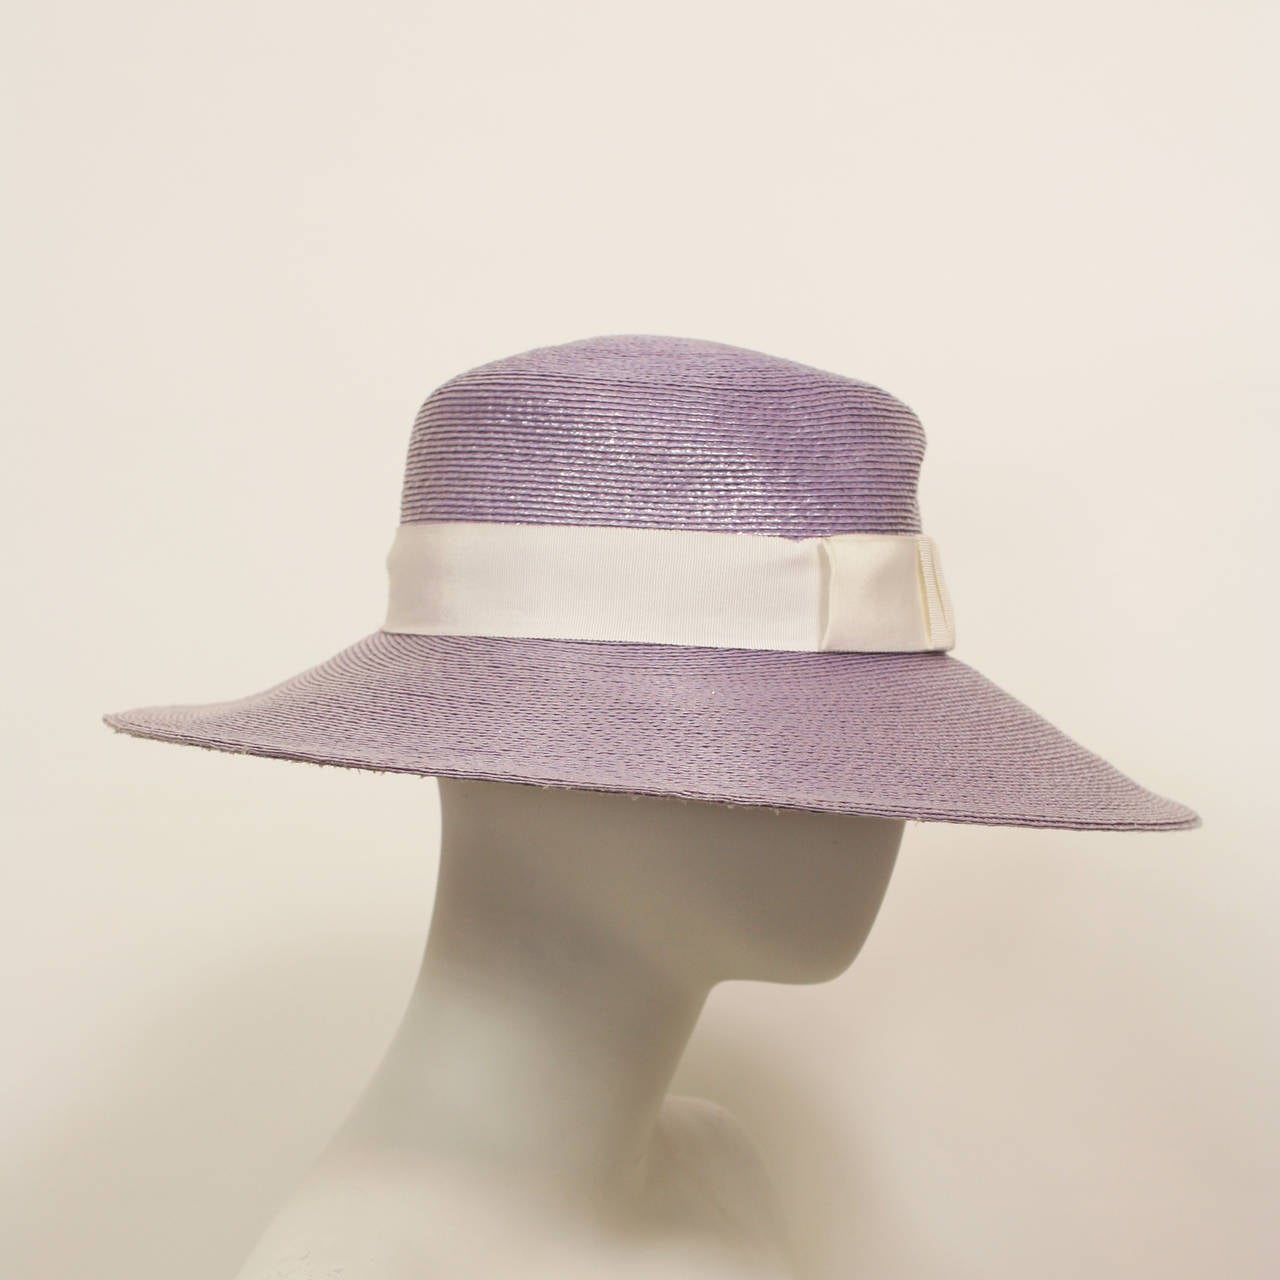 Yves Saint Laurent Runway Hat
Fine Raffia woven hat with beautiful purple-lavender glaze.
Fits head size small to medium.
Excellent condition.